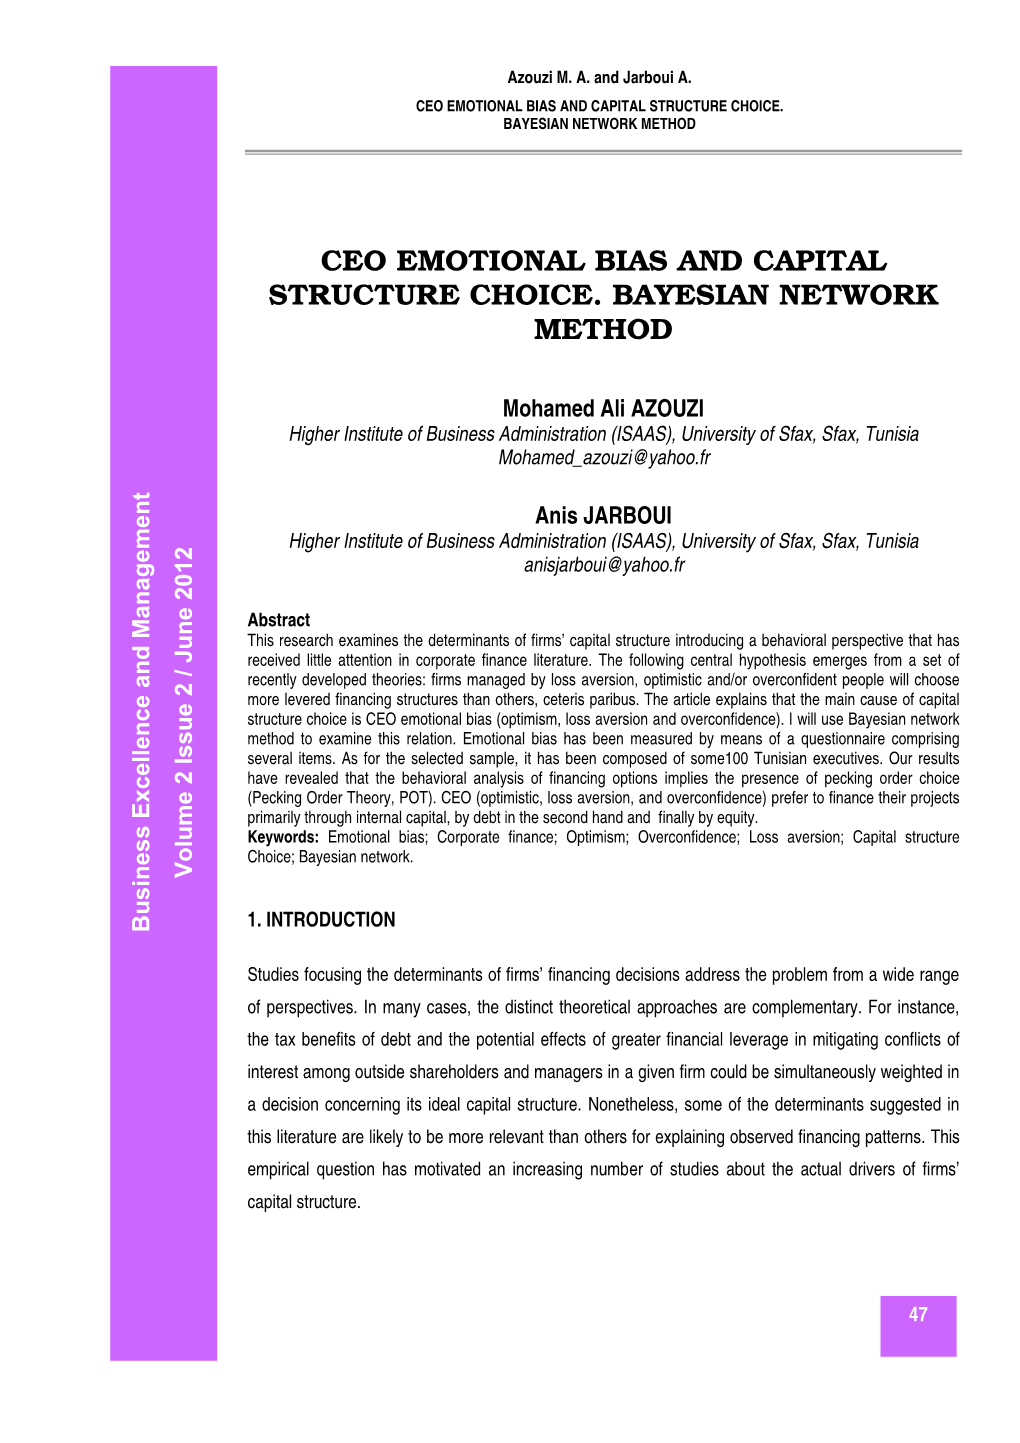 5. Ceo Emotional Bias and Capital Structure Choice. Bayesian Network